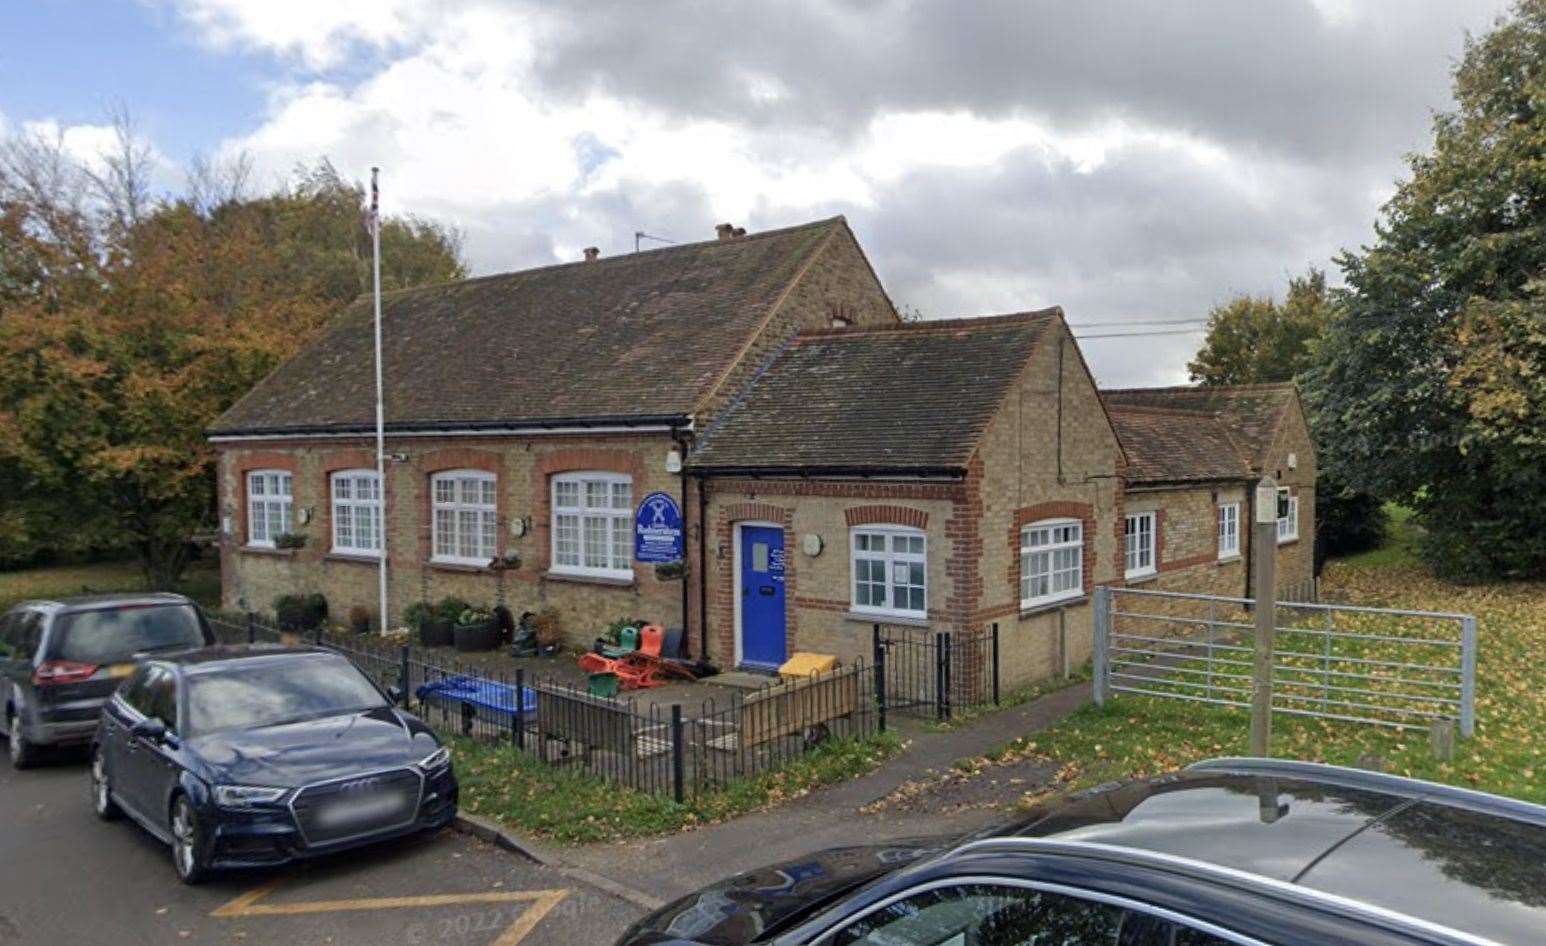 Firefighters tackling the blaze at Rodmersham Primary School, Sittingbourne. Picture: Google